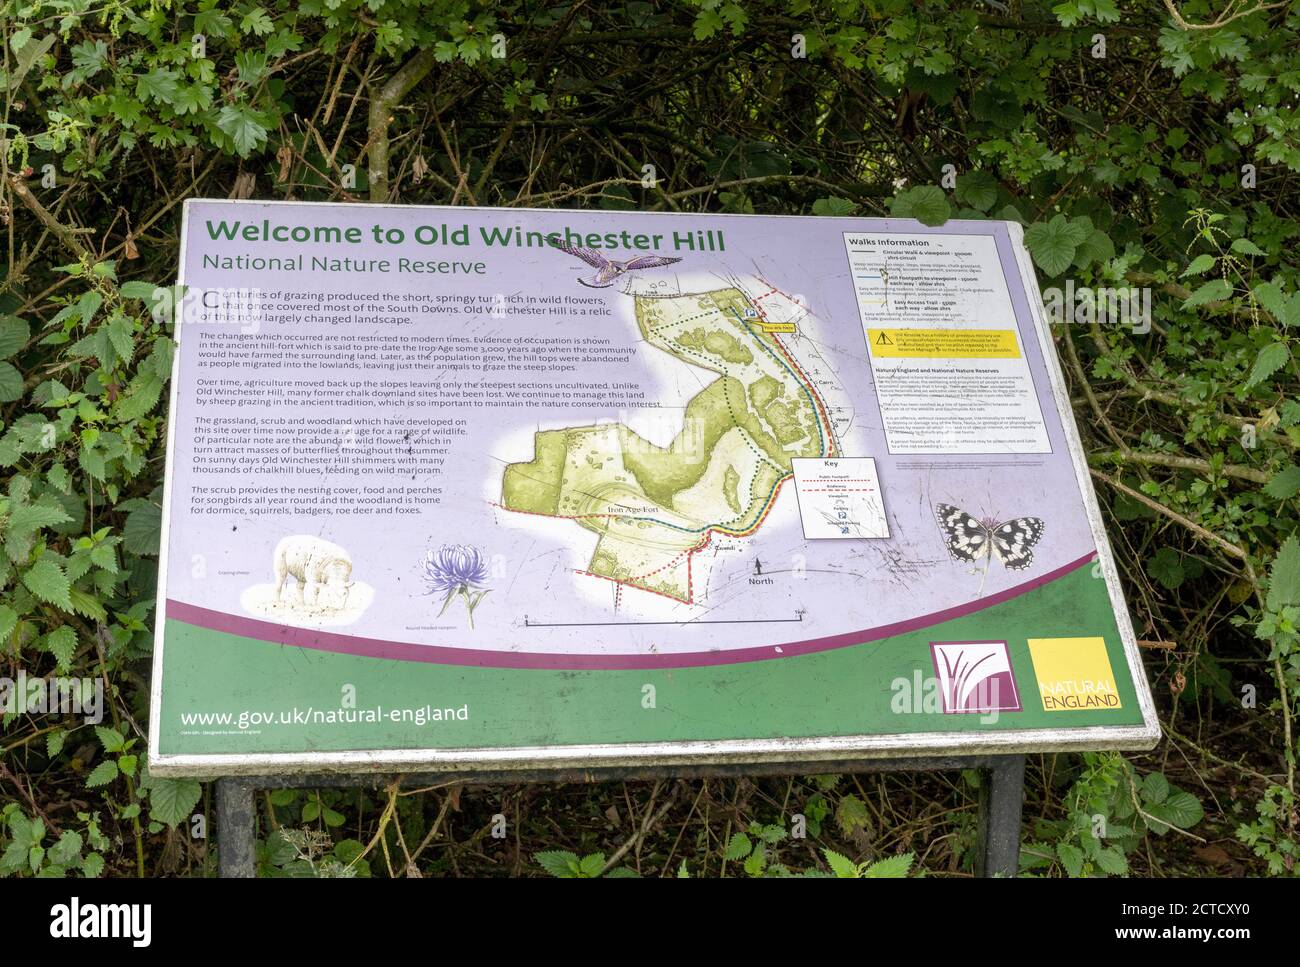 Old Winchester Hill, South Downs National Park, Hampshire, England, UK - view of tourist information board. Stock Photo